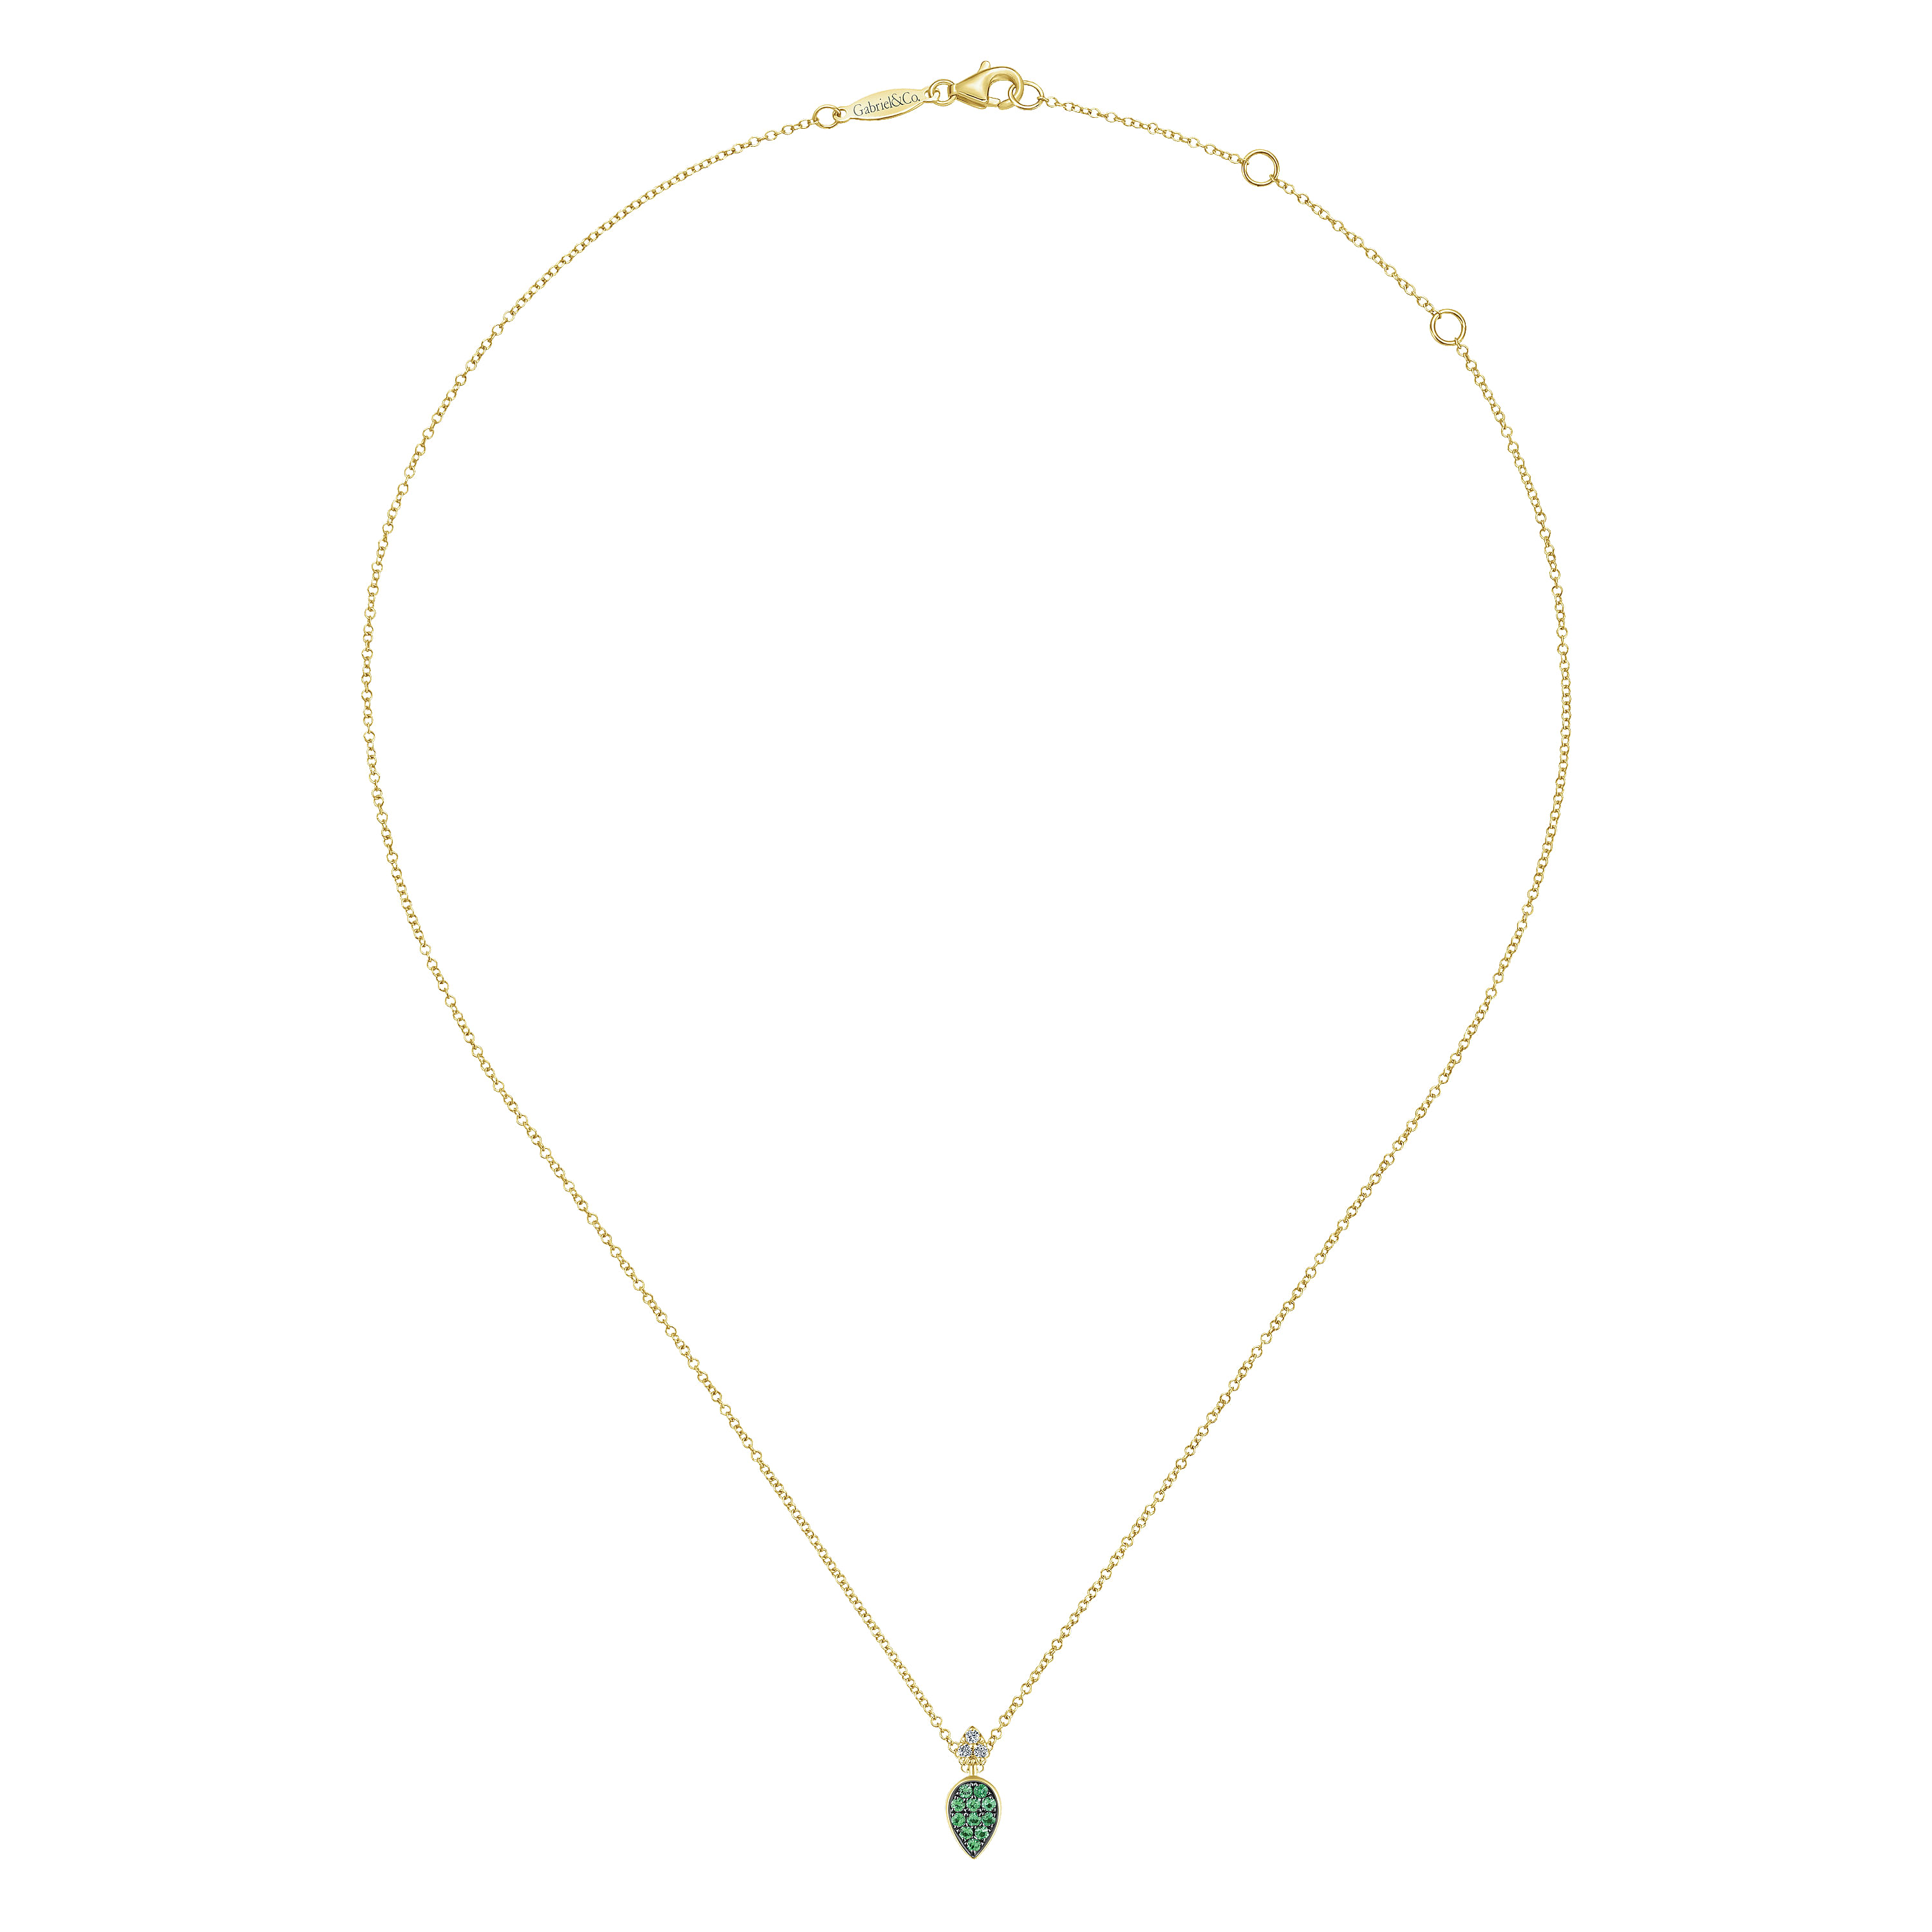 14K Yellow Gold Teardrop Pendant Necklace with Emeralds and Diamonds